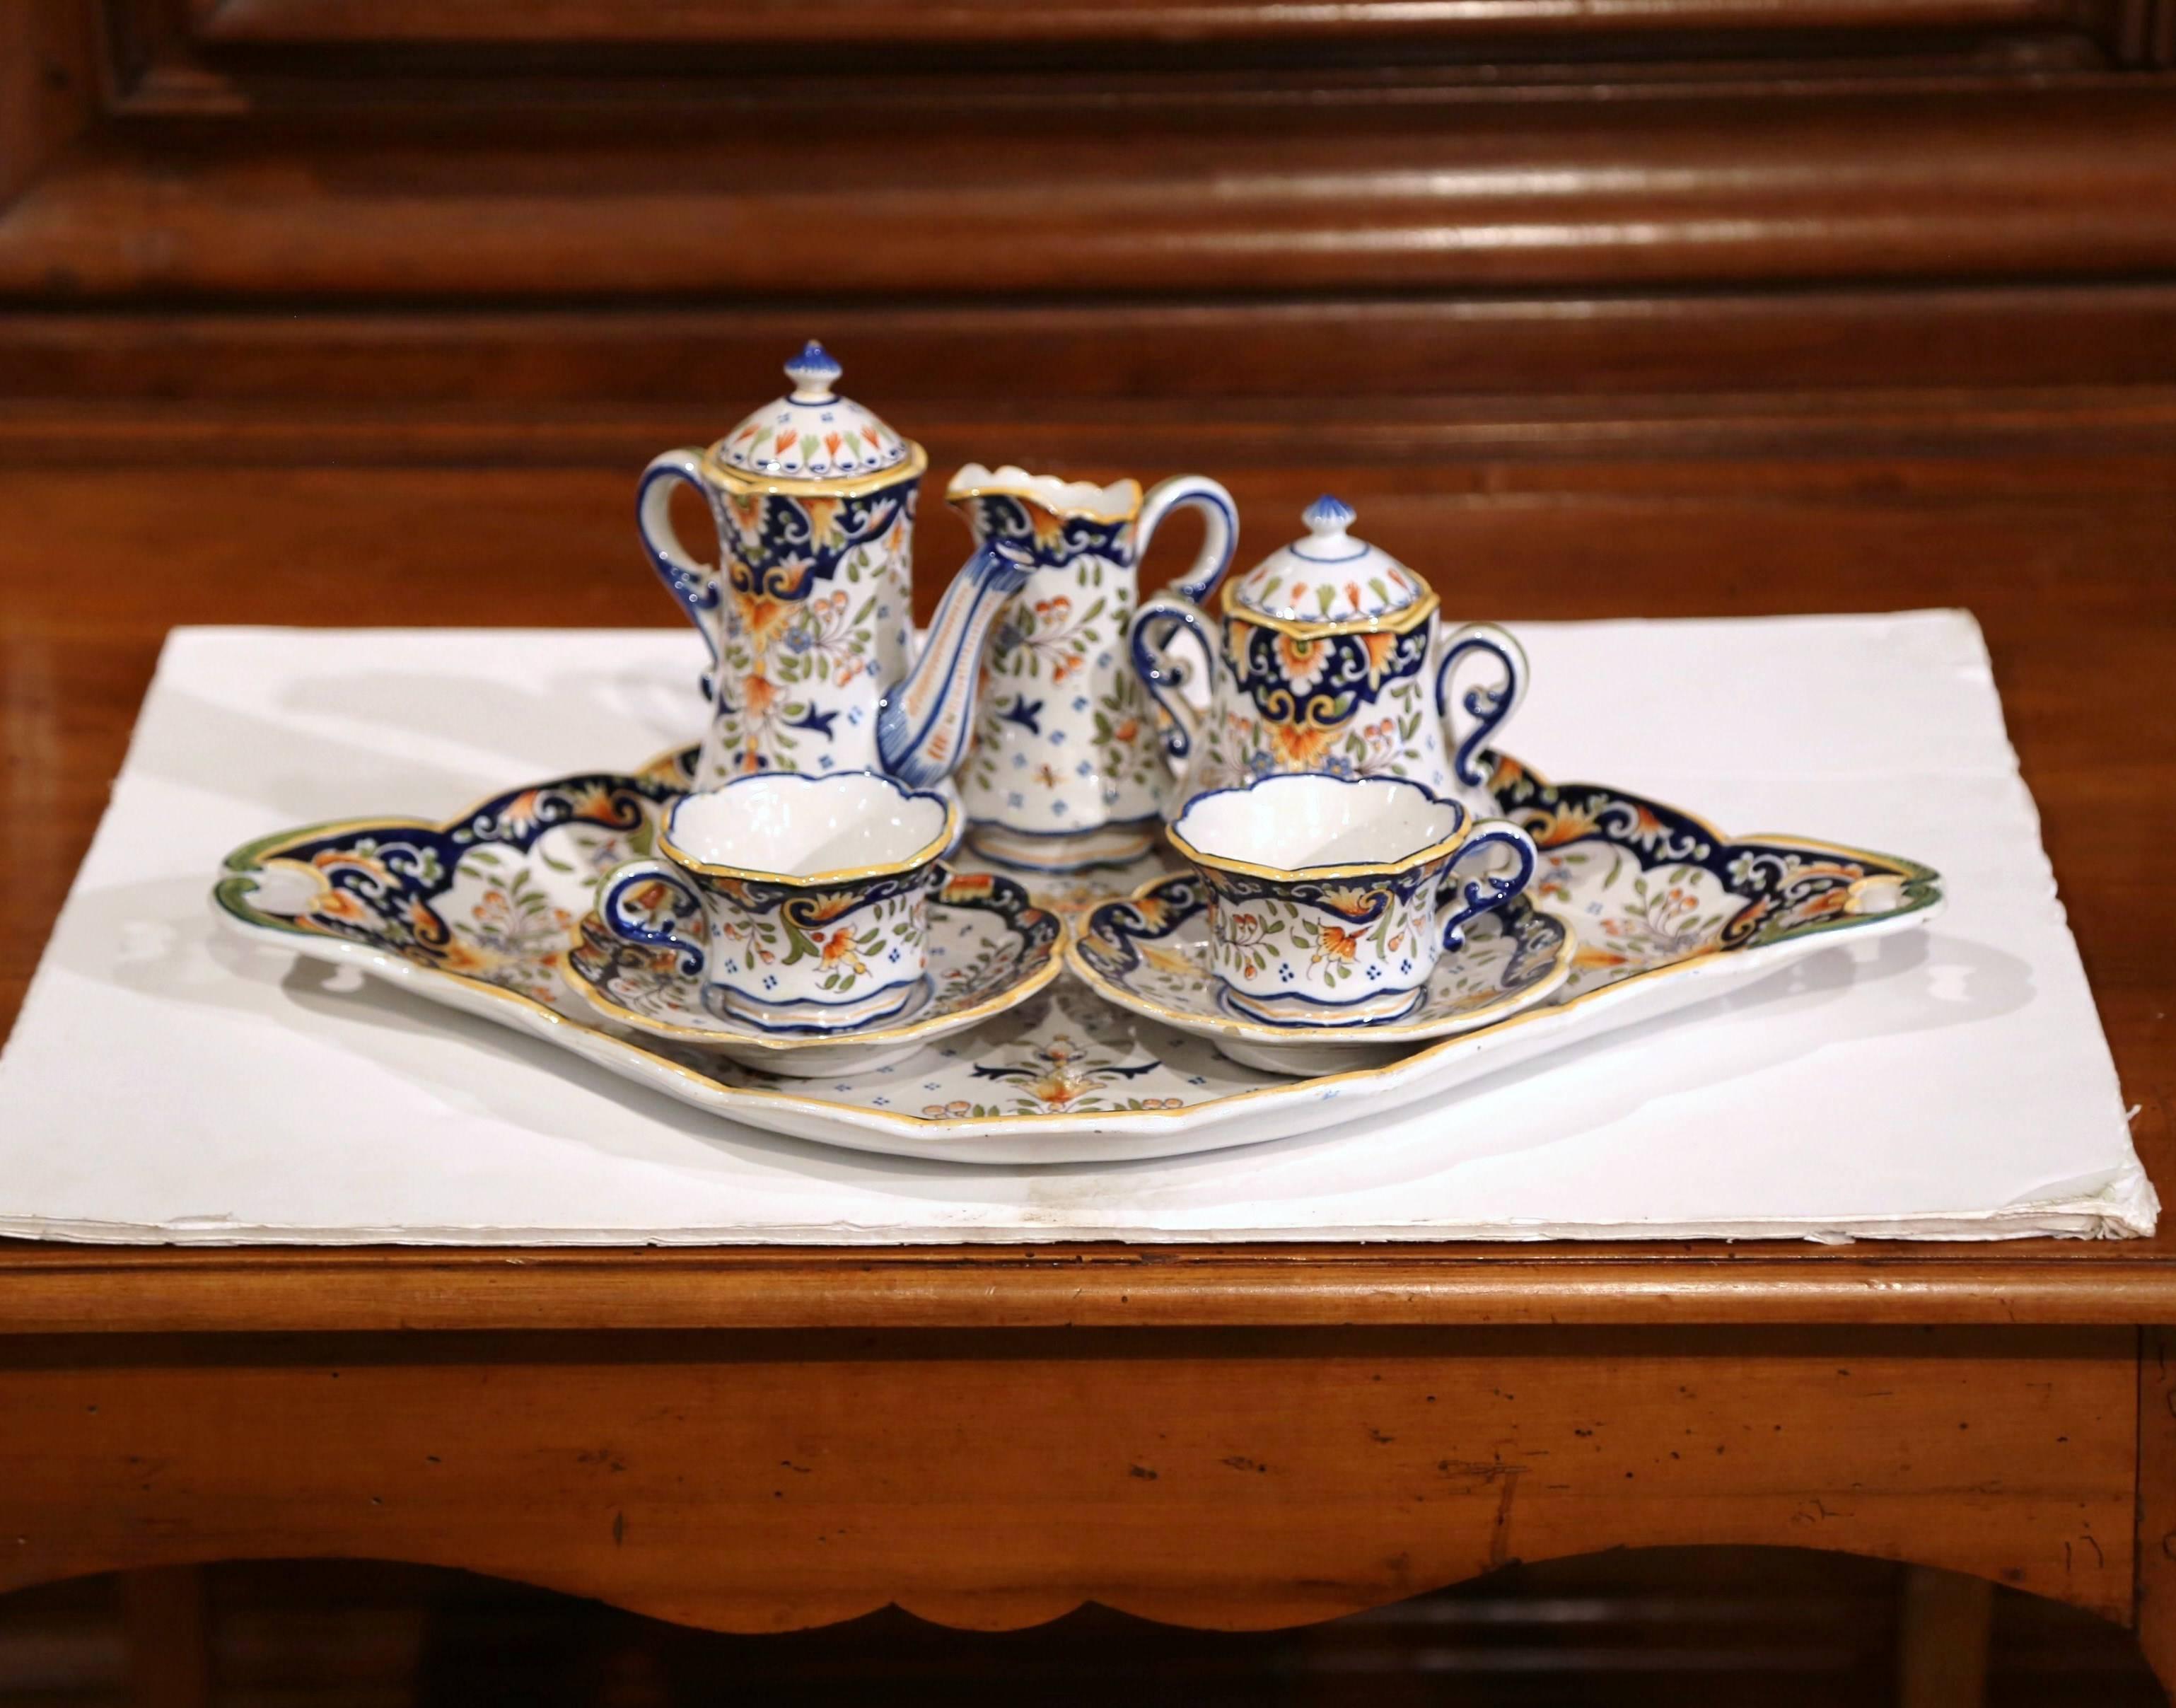 Serve coffee or tea in this elegant faience coffee set. Crafted in Blois, France circa 1920, the set includes a large oval tray, two cups with saucers, a cream pitcher, a sugar bowl with top, and a coffeepot with lid, (ten items total). Every piece